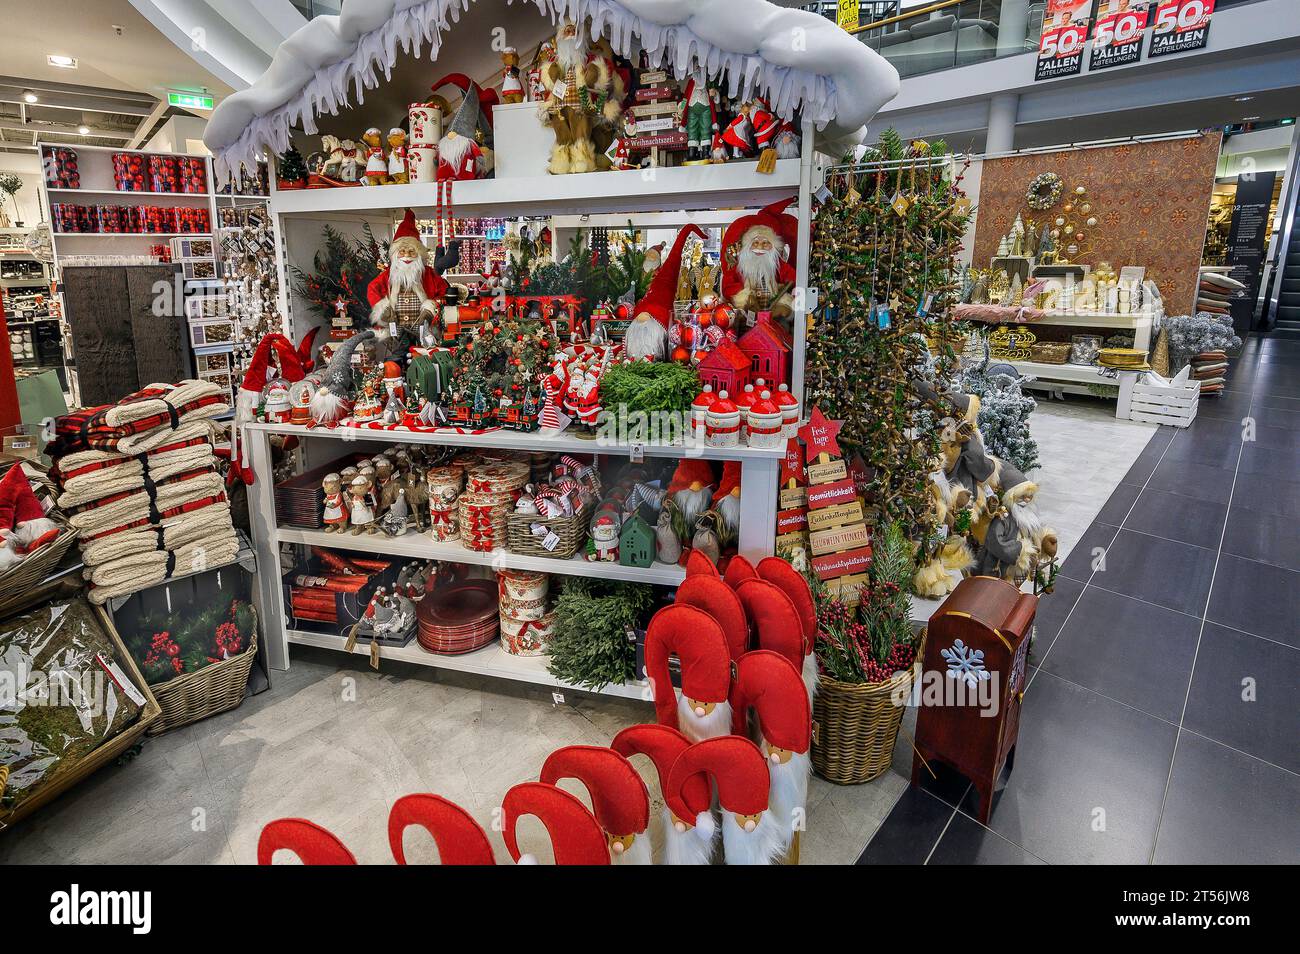 Christmas decoration, kitsch articles in a furniture store, Bavaria, Germany Stock Photo